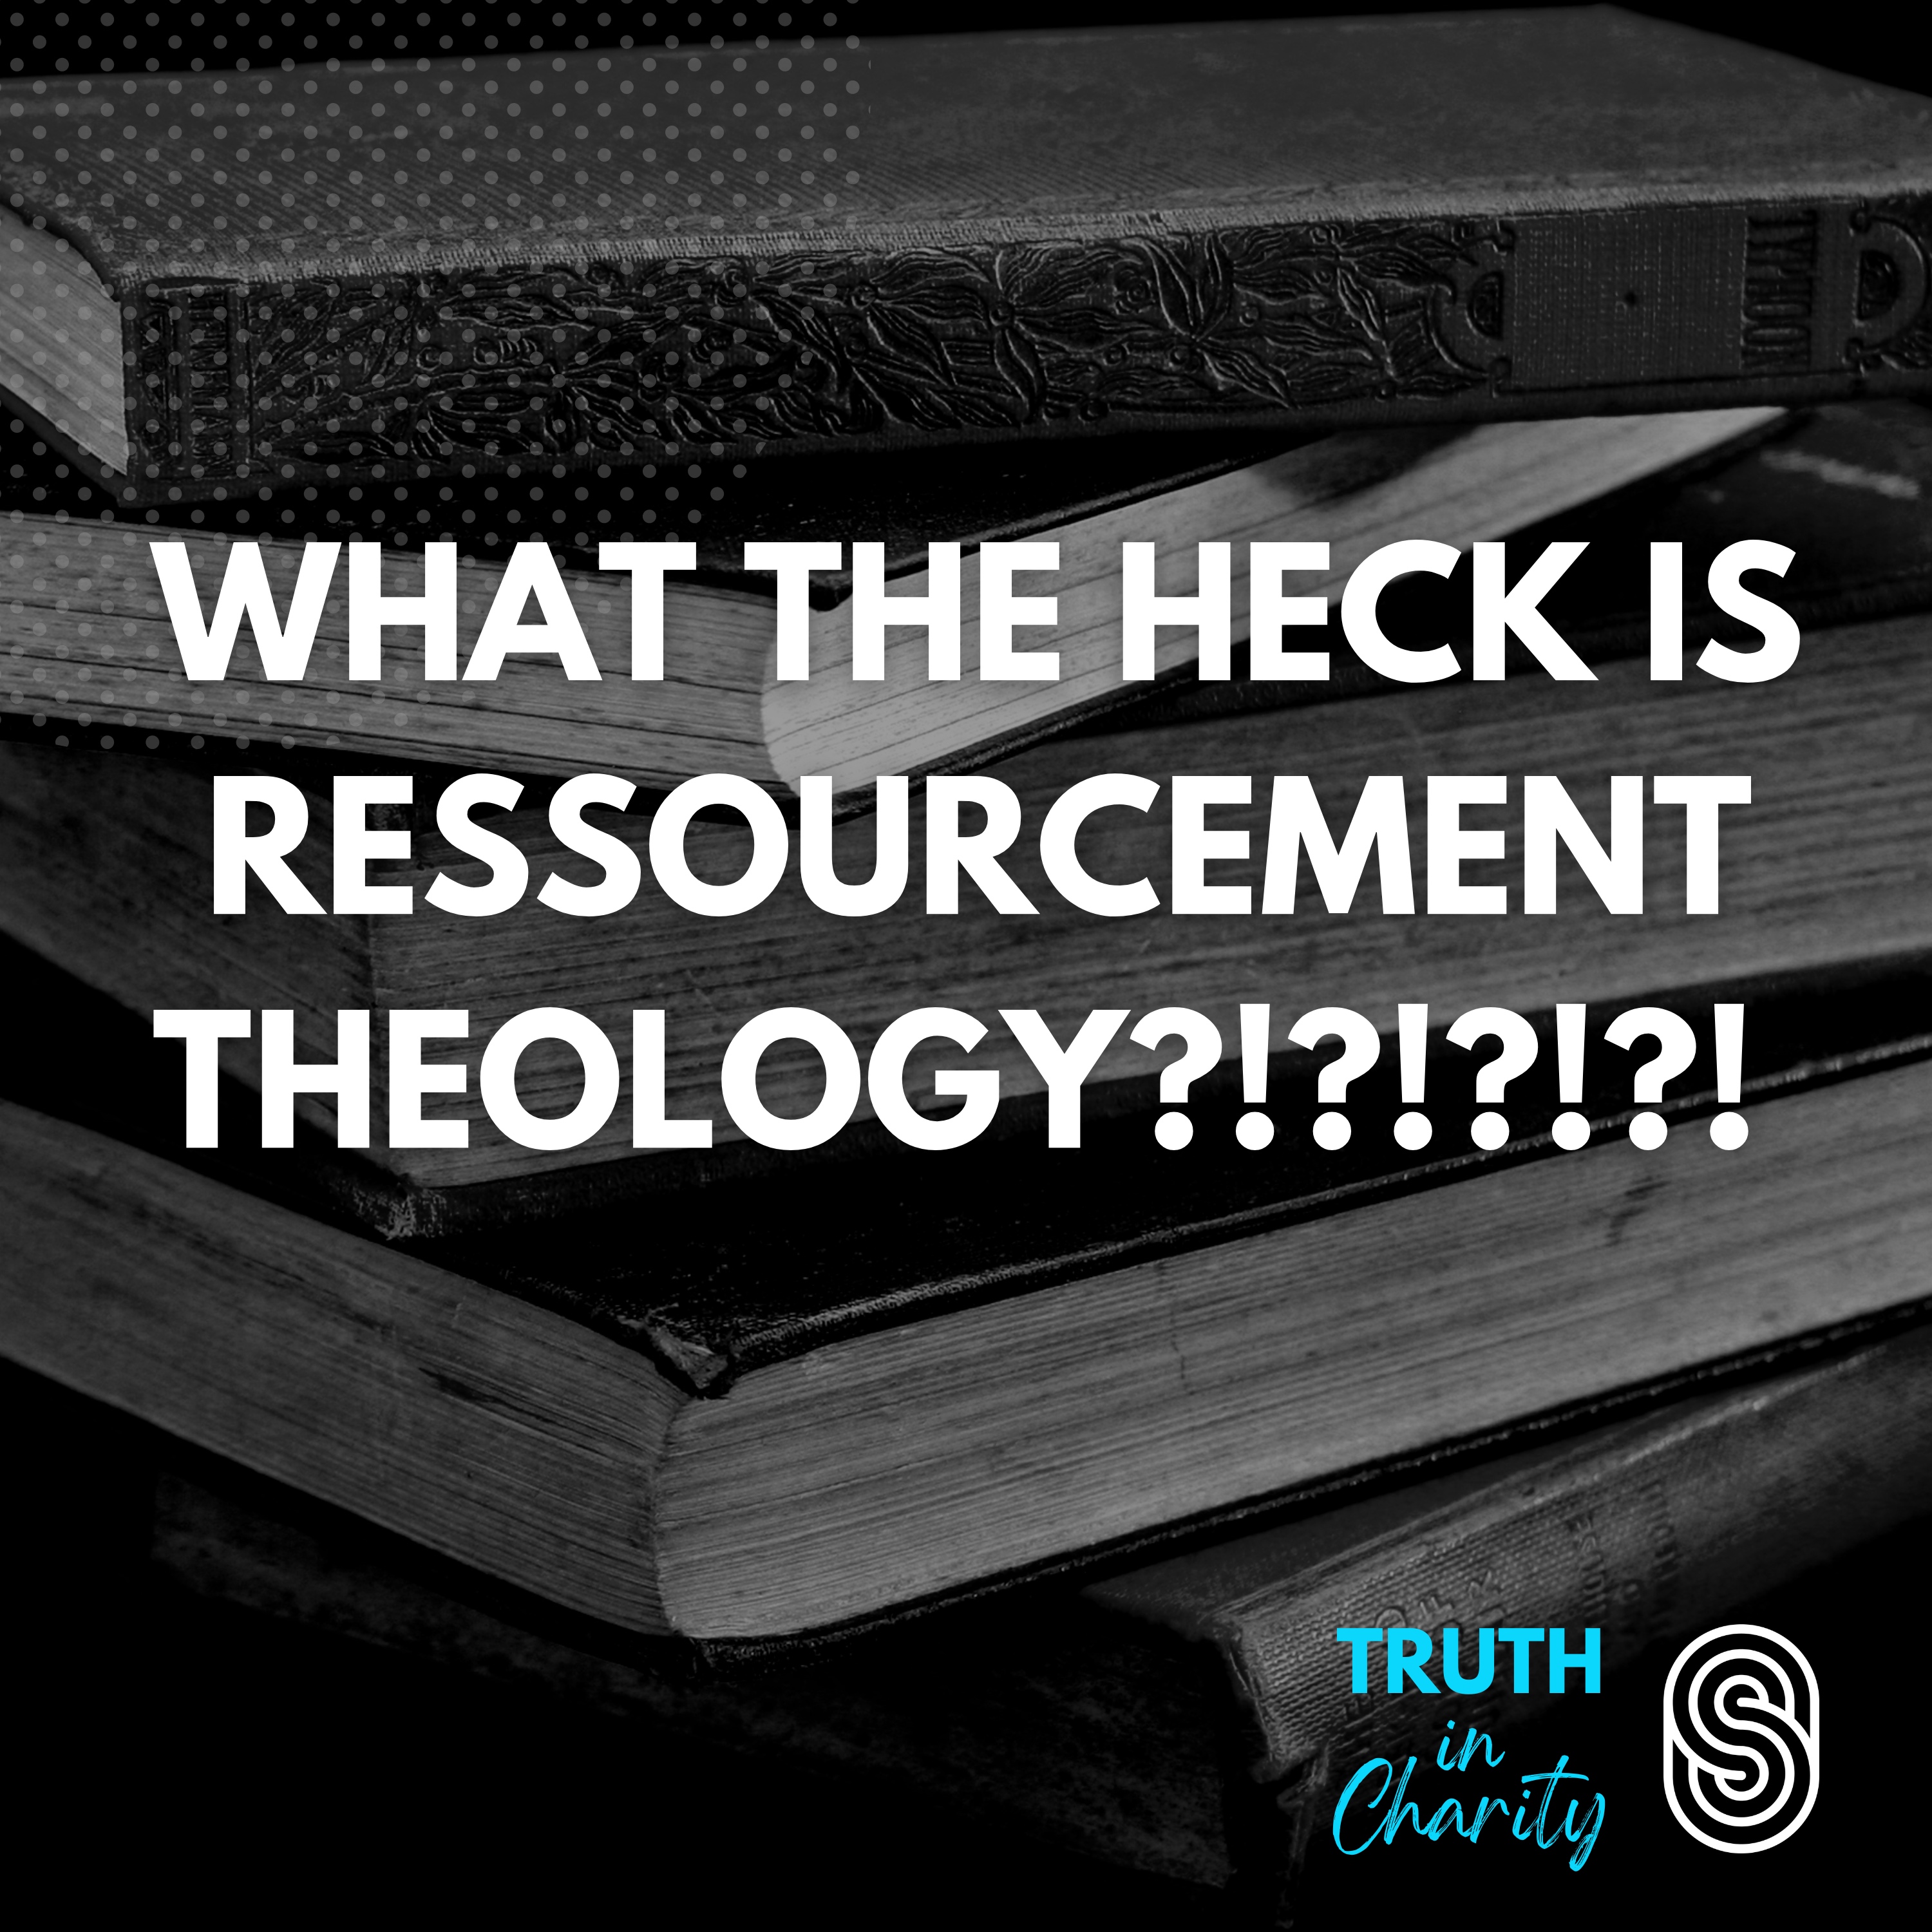 What the Heck is Ressourcement Theology?!?!?!